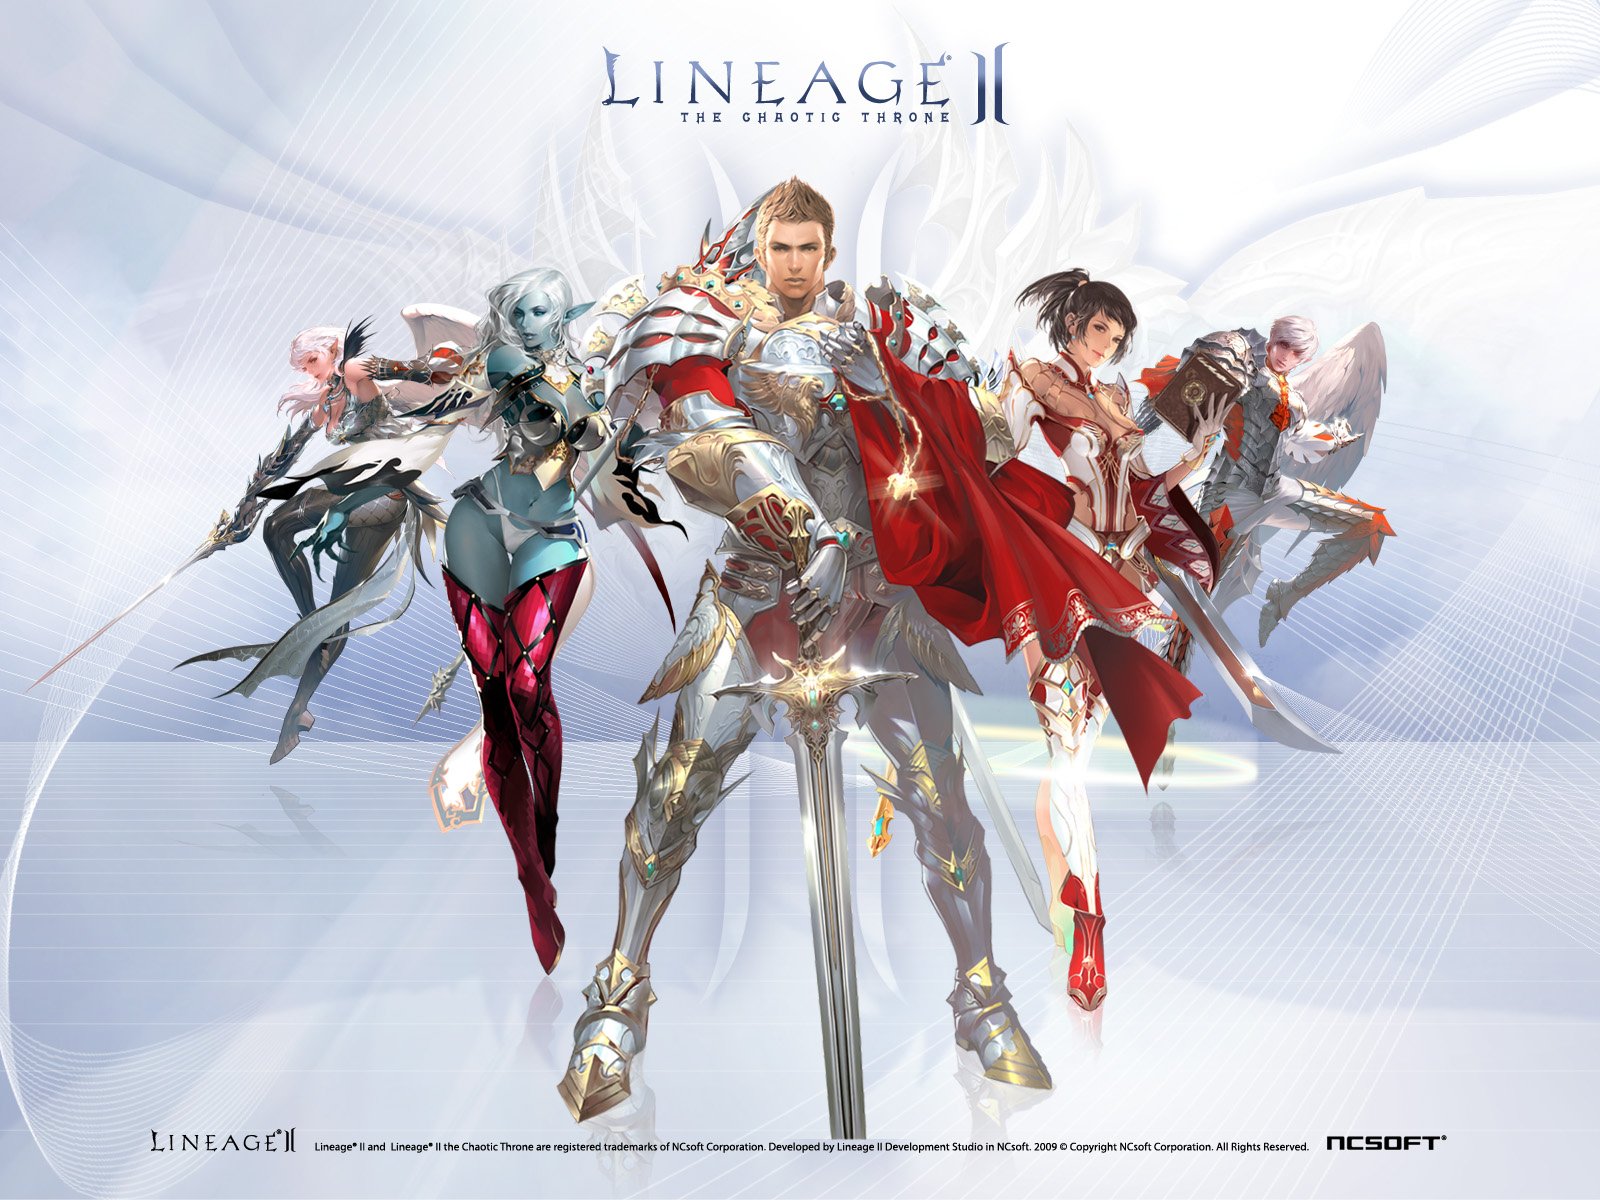 Wallpapers   Lineage 2 Wallpapers